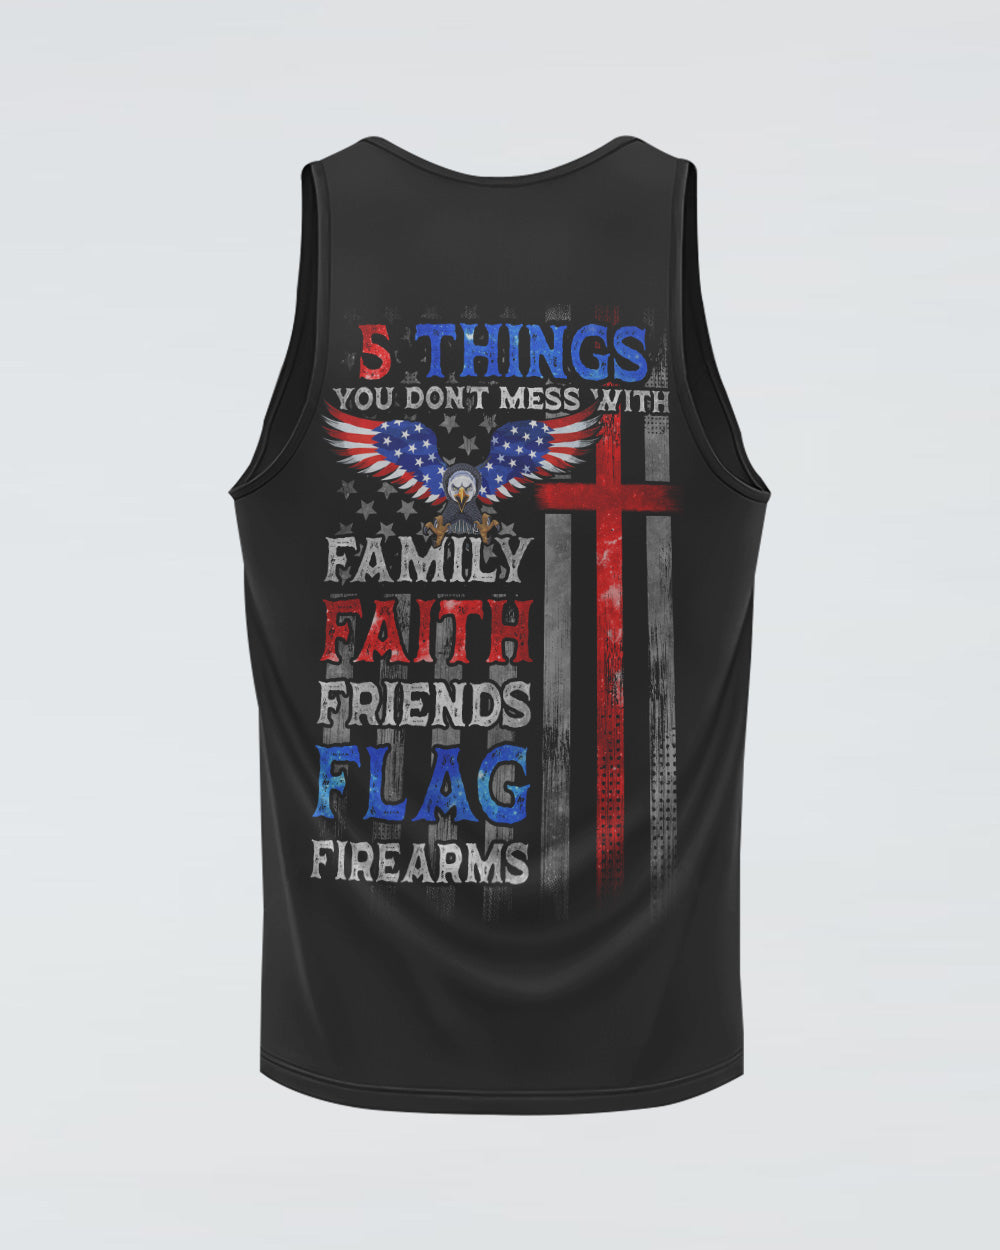 5 Things You Don't Mess With Eagle Cross American Flag Men's Christian Tanks